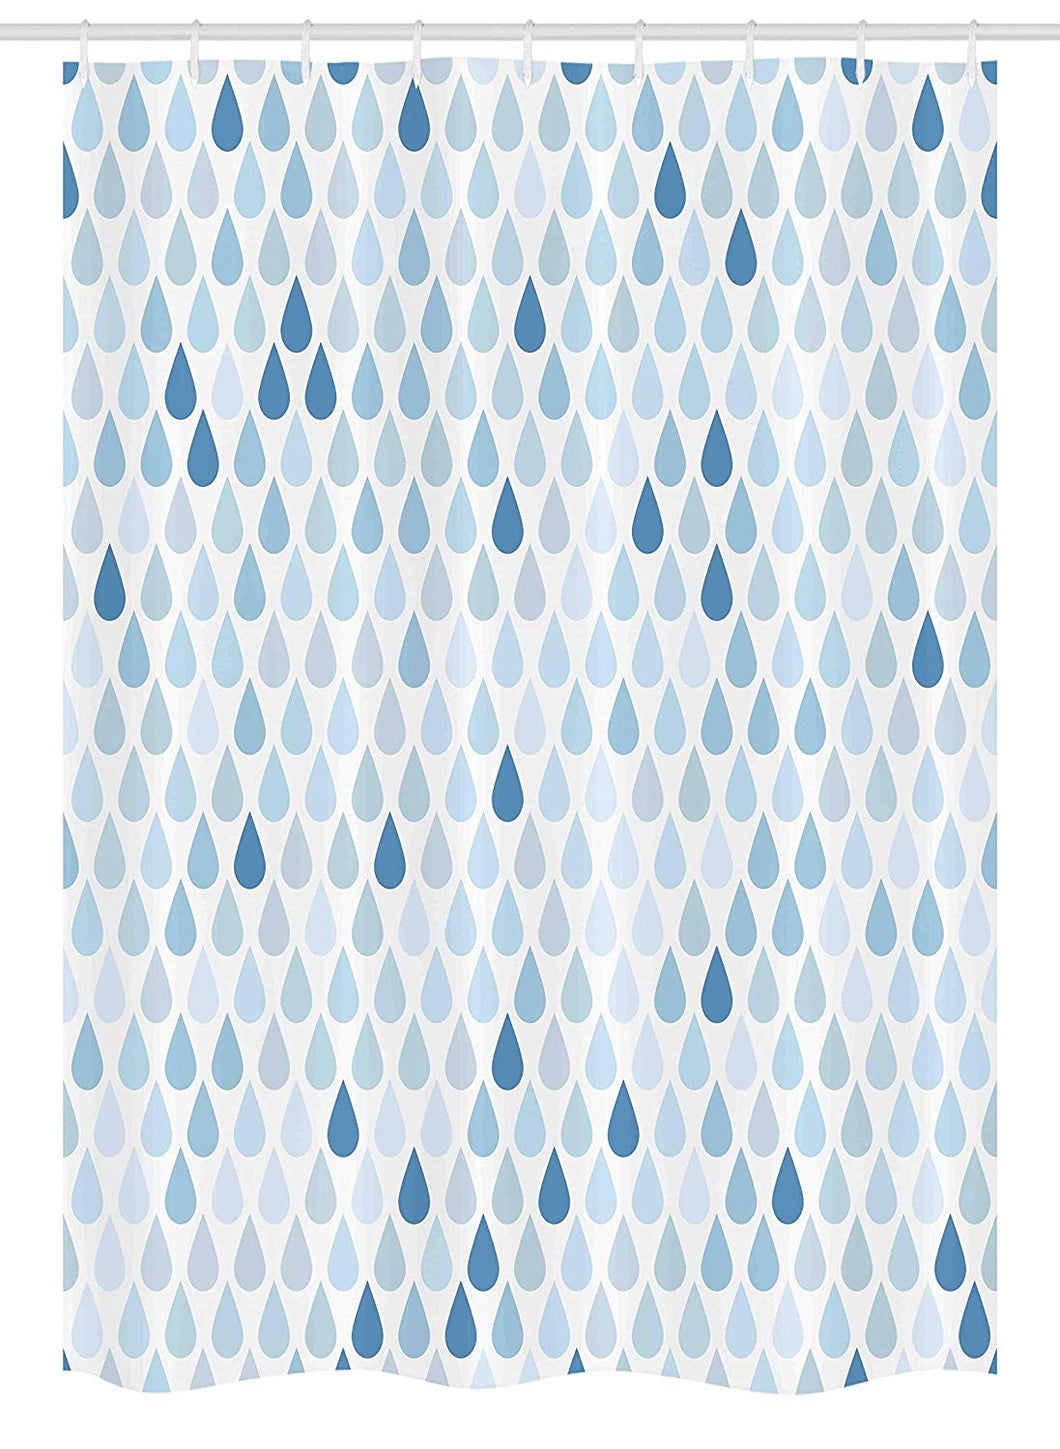 Ambesonne Blue and White Stall Shower Curtain, Minimalist Rain Drops Motive in Tones Tears of Earth Air Gravity Image Art, Fabric Bathroom Decor Set with Hooks, 54